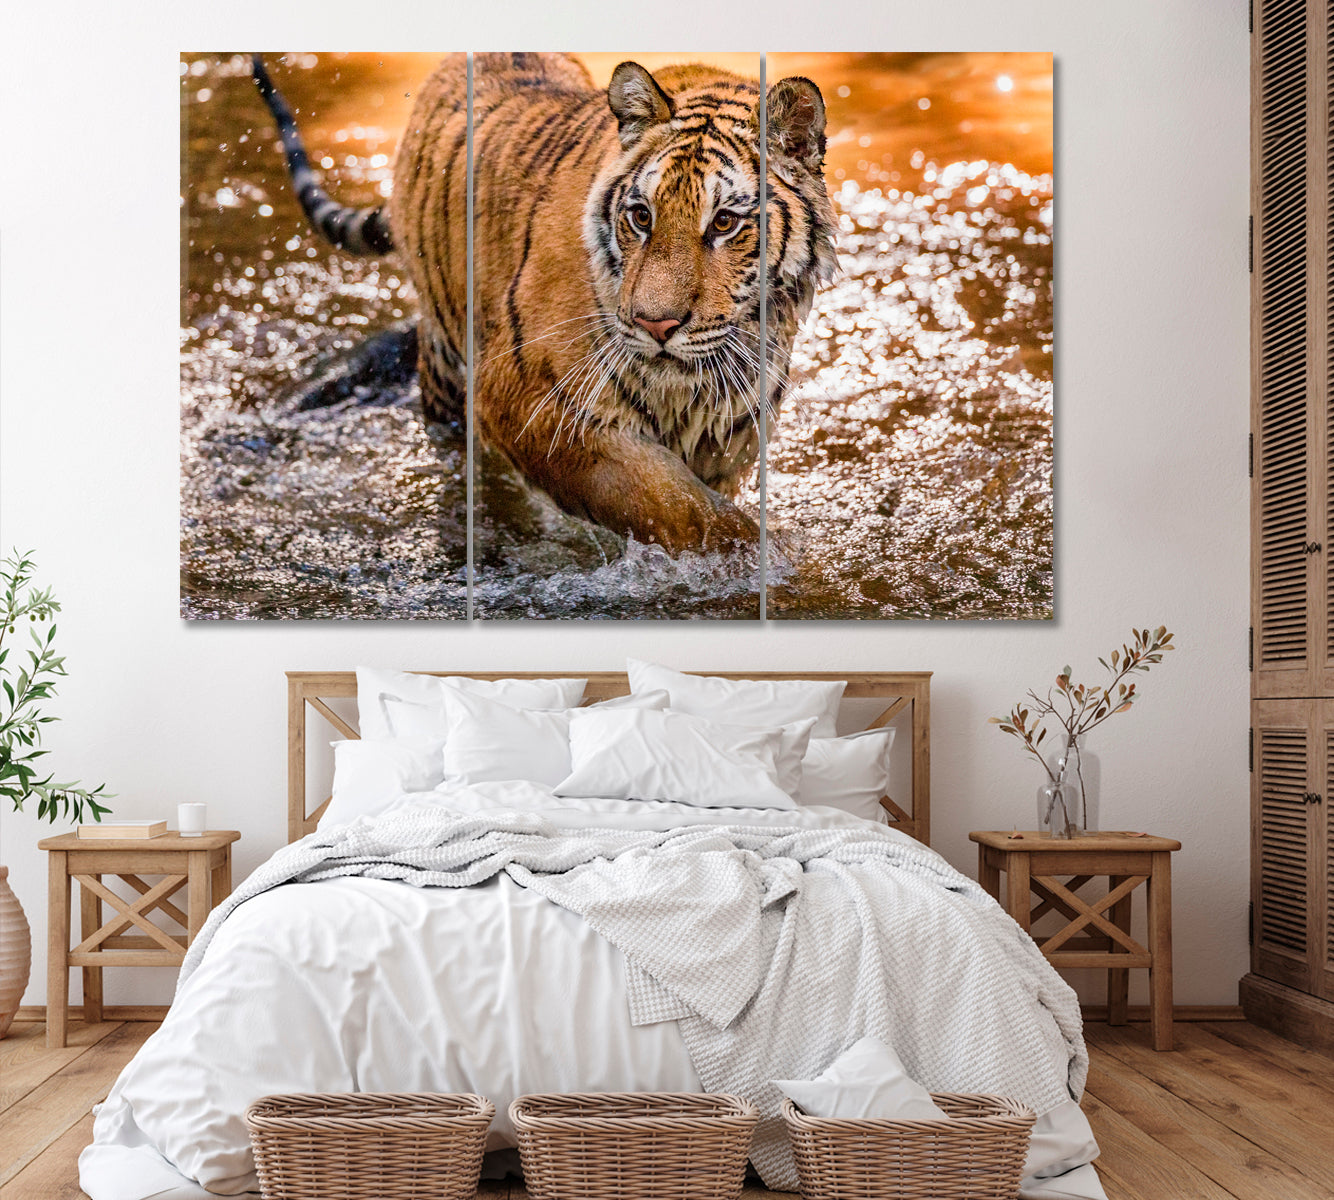 Siberian Tiger in Taiga Russia Canvas Print ArtLexy 3 Panels 36"x24" inches 